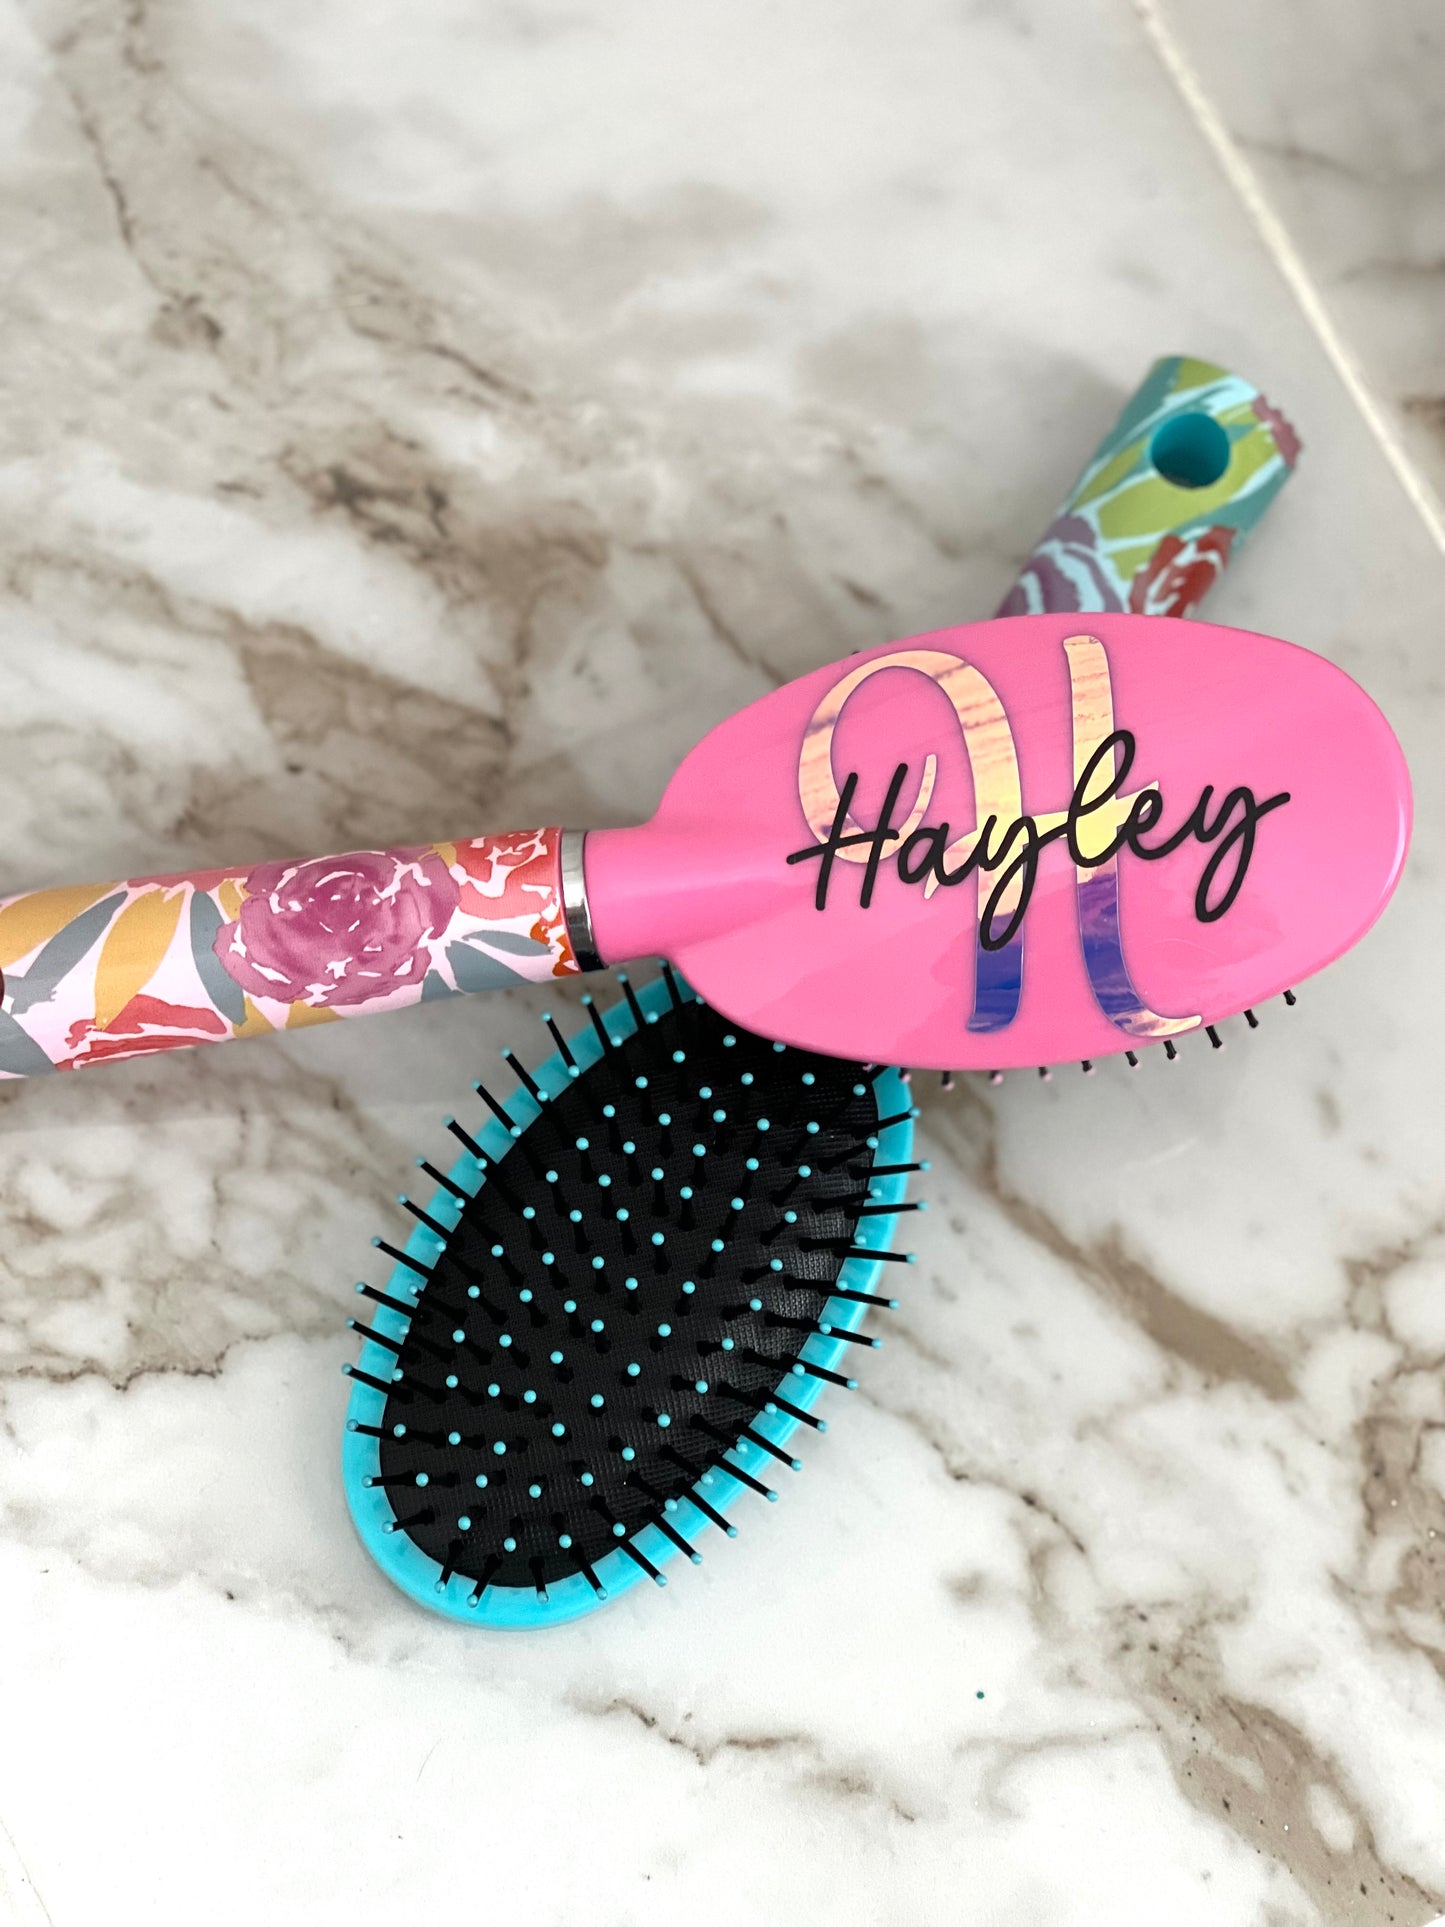 What's more beautiful than a floral brush? How about one that's personalized with your name! When you're searching for the perfect hairbrush, look no further than this custom personalized hair brush. This oval hairbrush is crafted with the highest quality materials and designed to last. We know you'll love using it every day - it feels amazing on your hair and leaves it looking voluminous and luxurious. Plus, with its chic floral design, it is also chic.